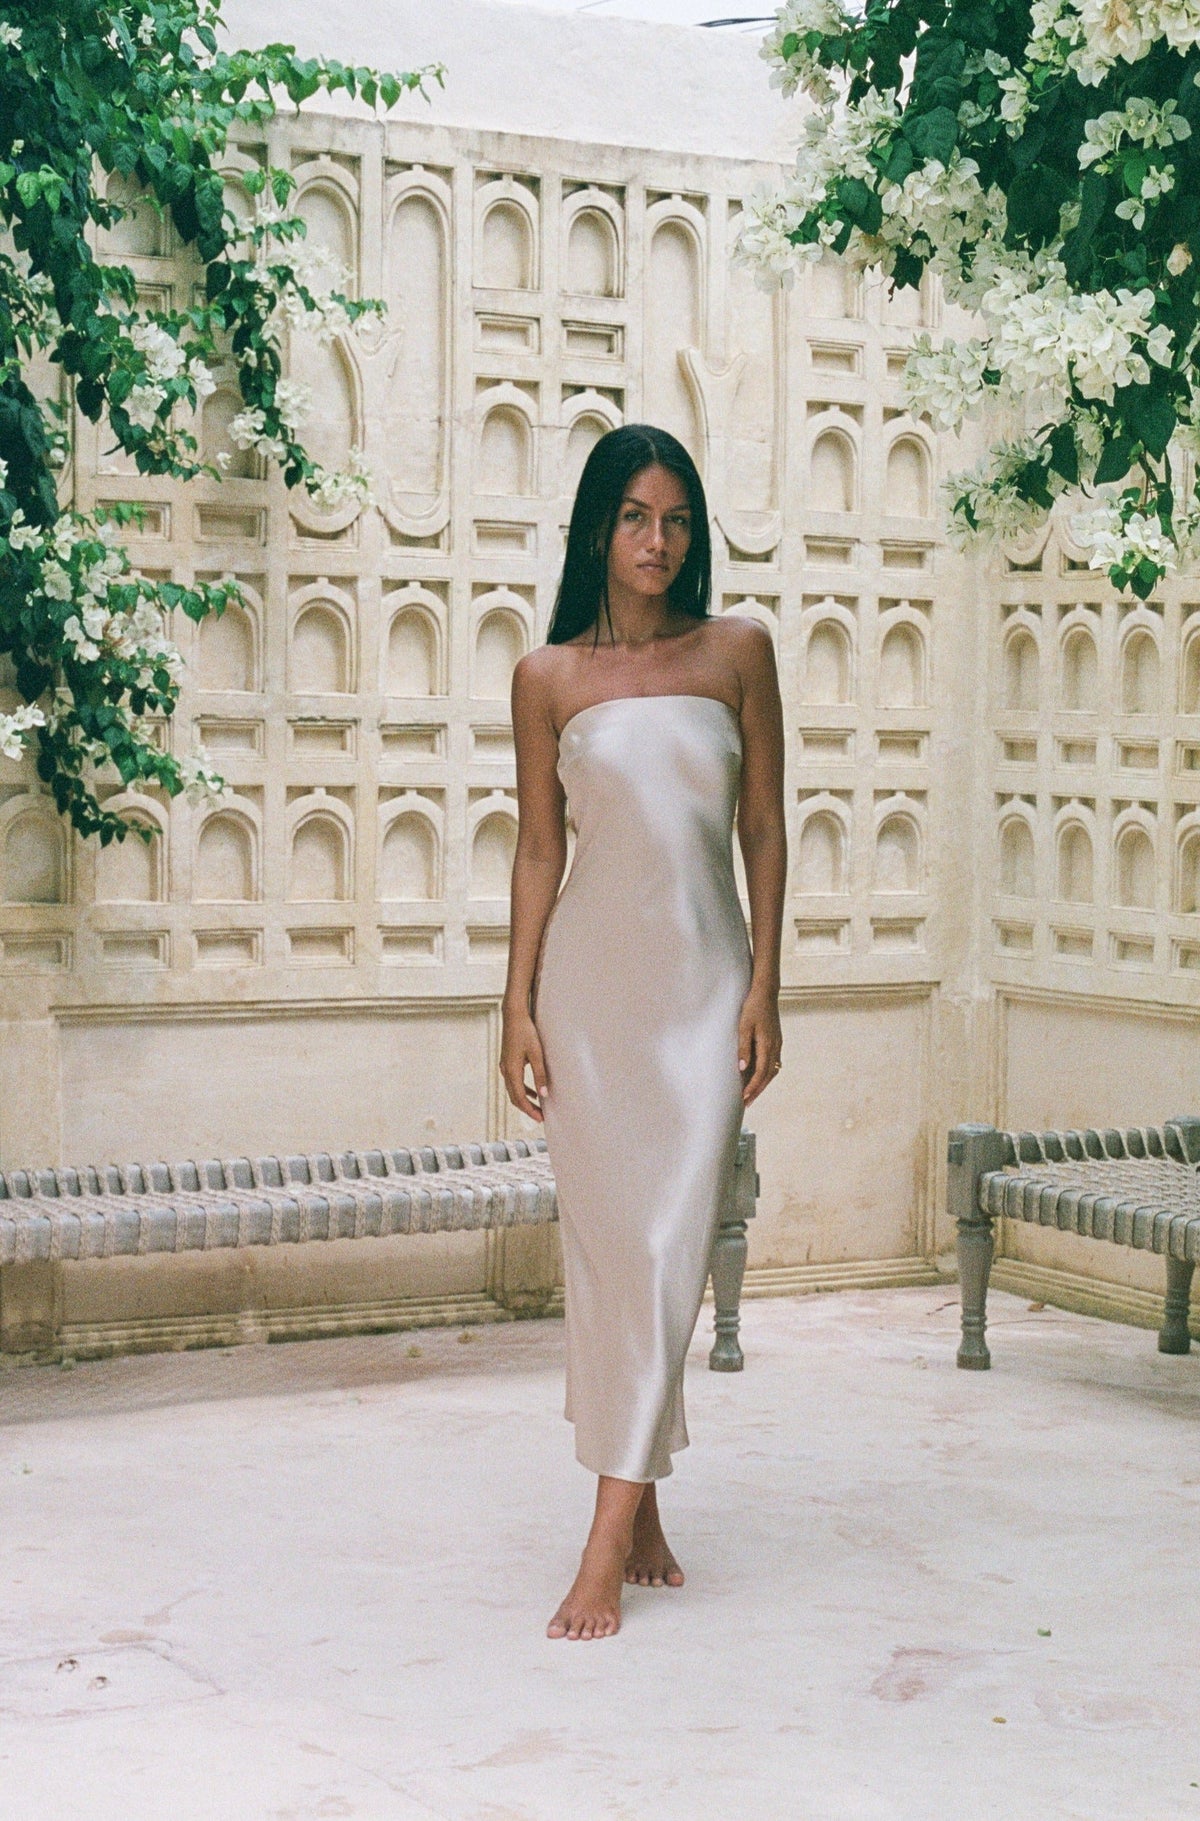 This is an image of Anna Slip in Champagne - RESA featuring a model wearing the dress